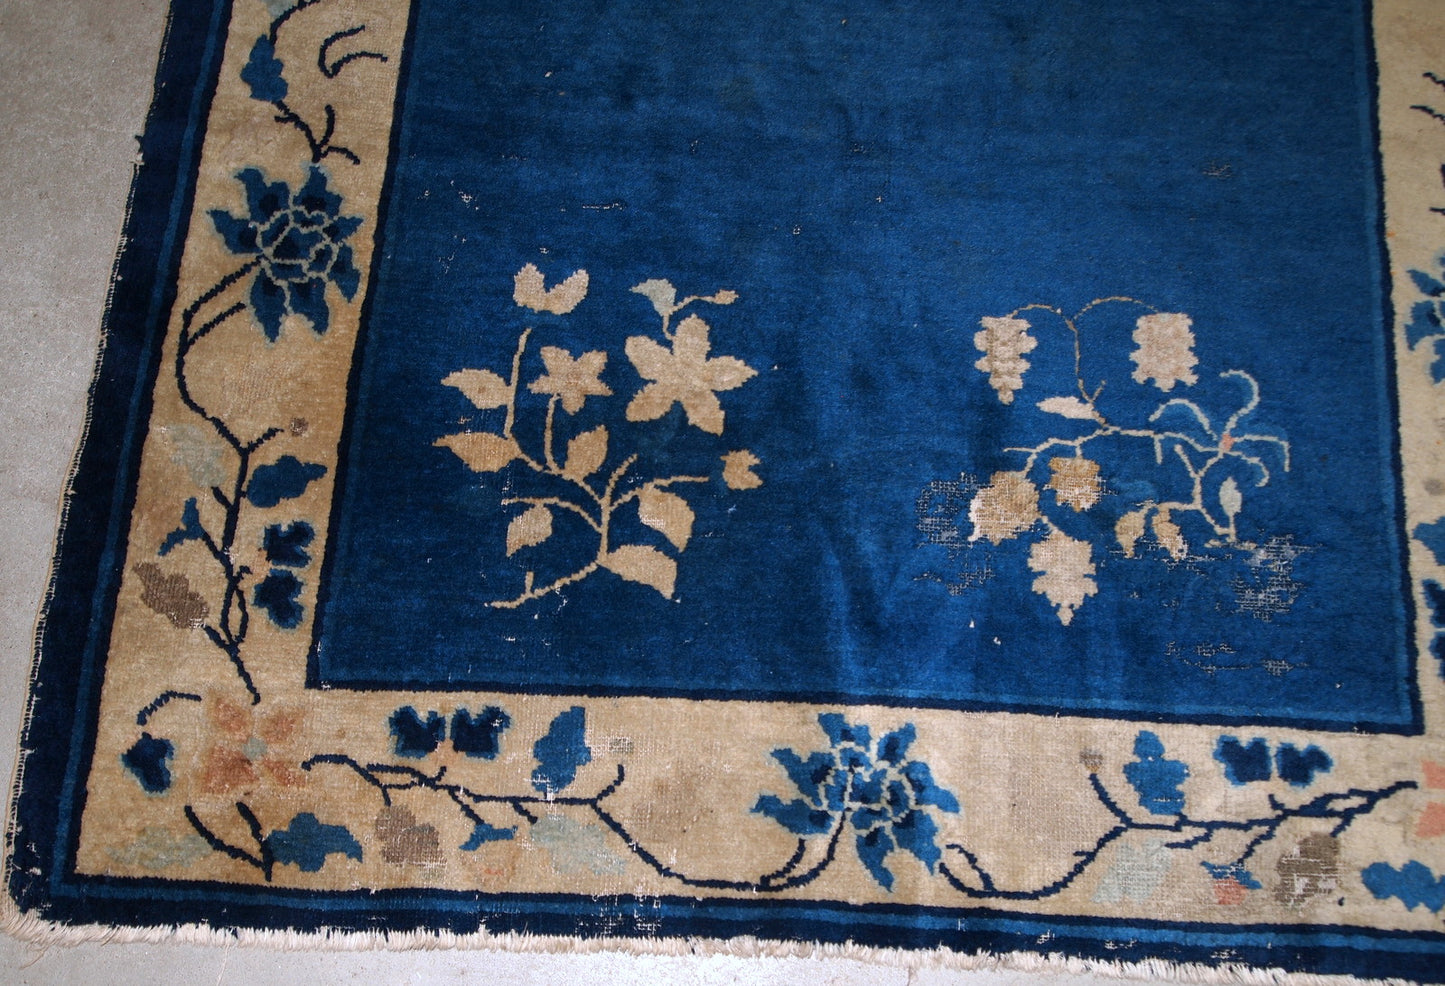 Handmade antique rug from Beijing, China, made in blue wool. The rug is in original condition, has some age wear. It is from the 1900s.